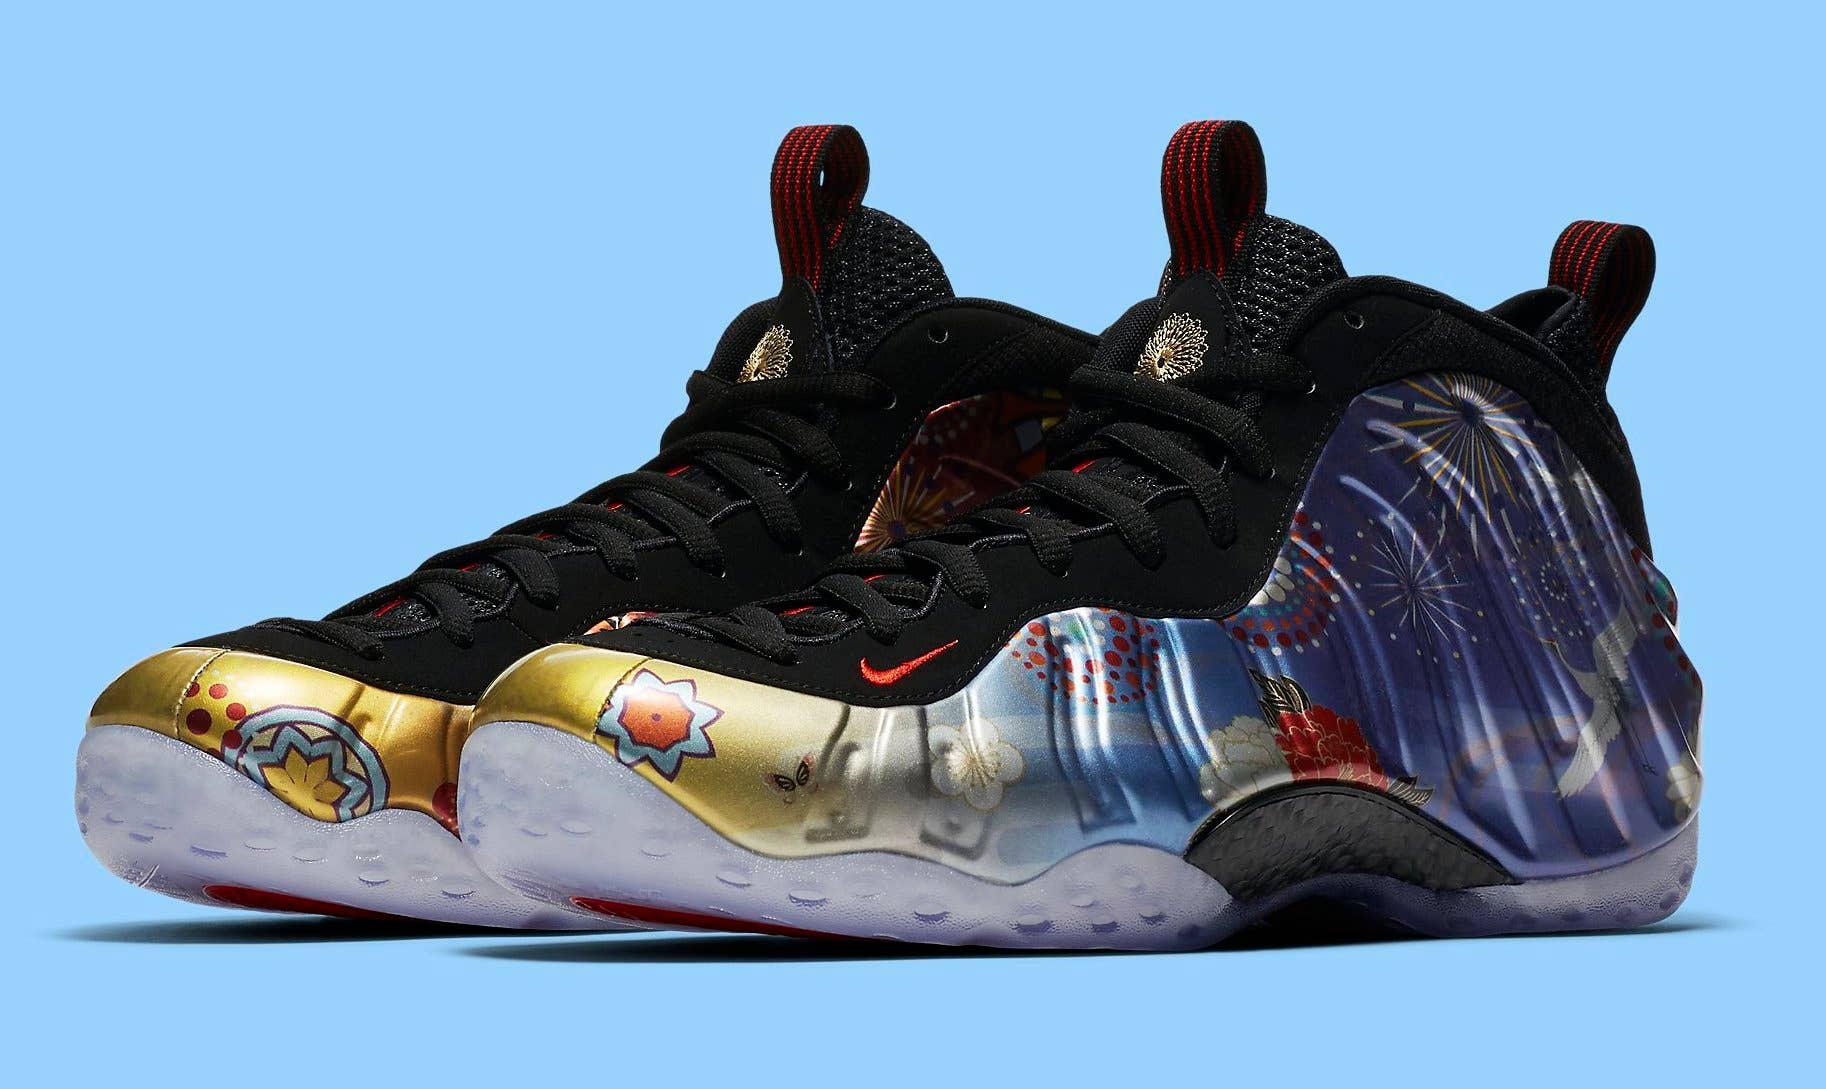 Nike Air Foamposite One 'Chinese New Year' AO7541 006 (Pair)